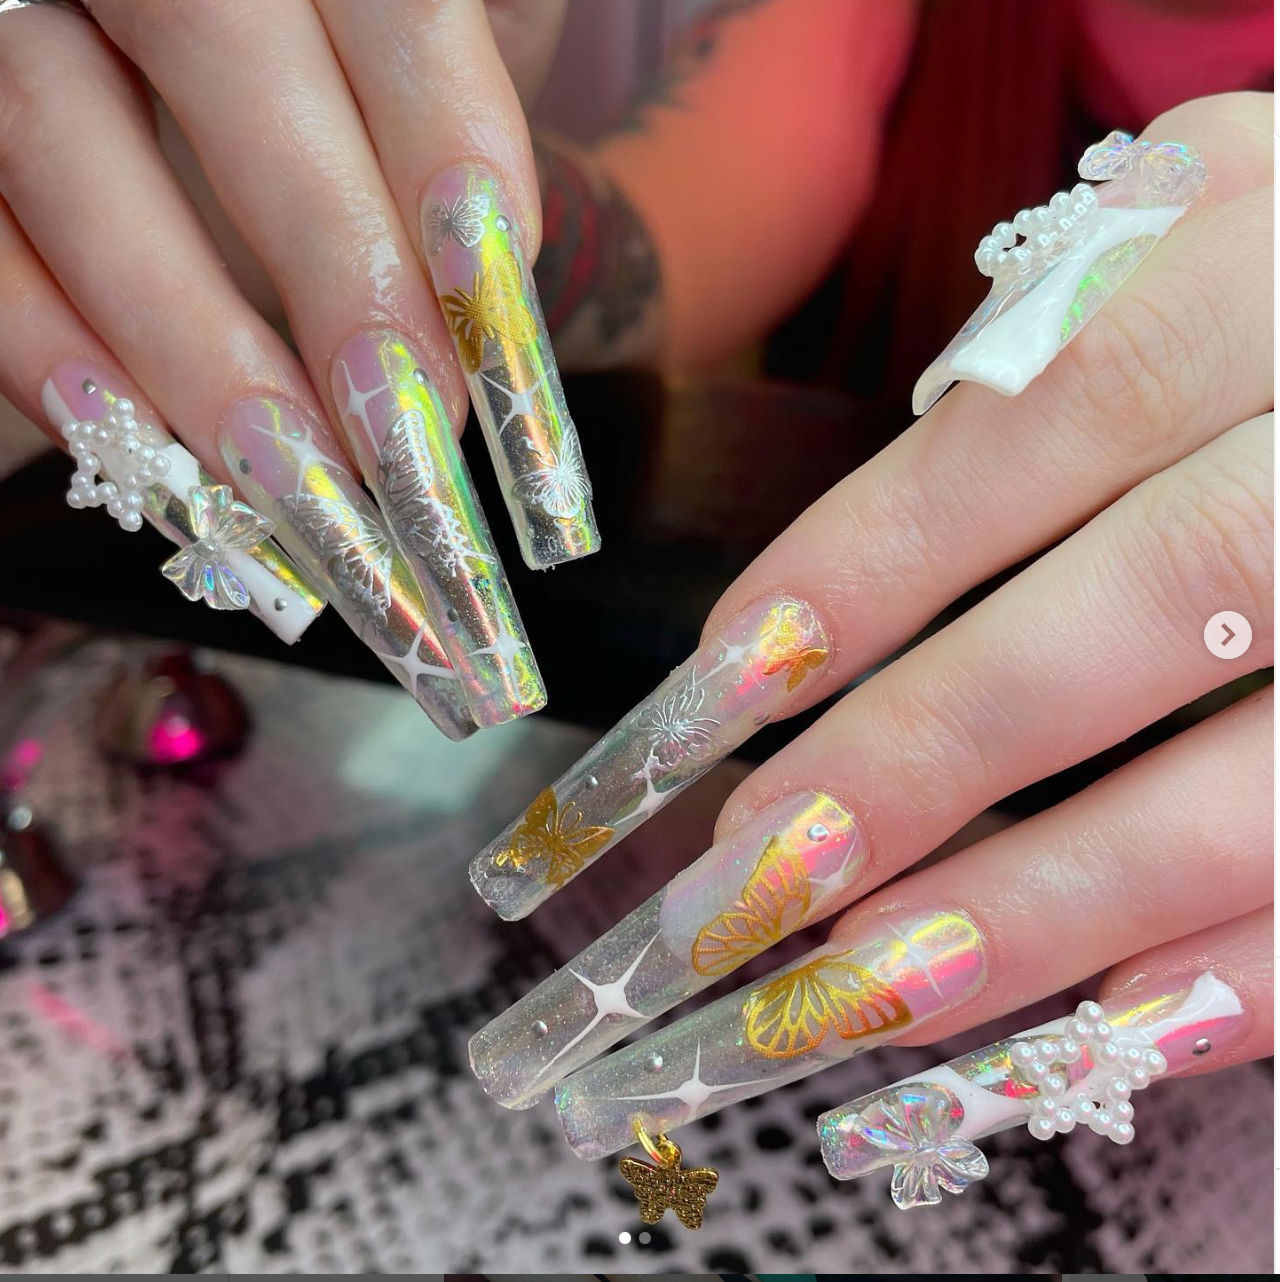 iridescent magical butterglies nail art extensions by DJ and nail artist APH at venom salon in Bristol